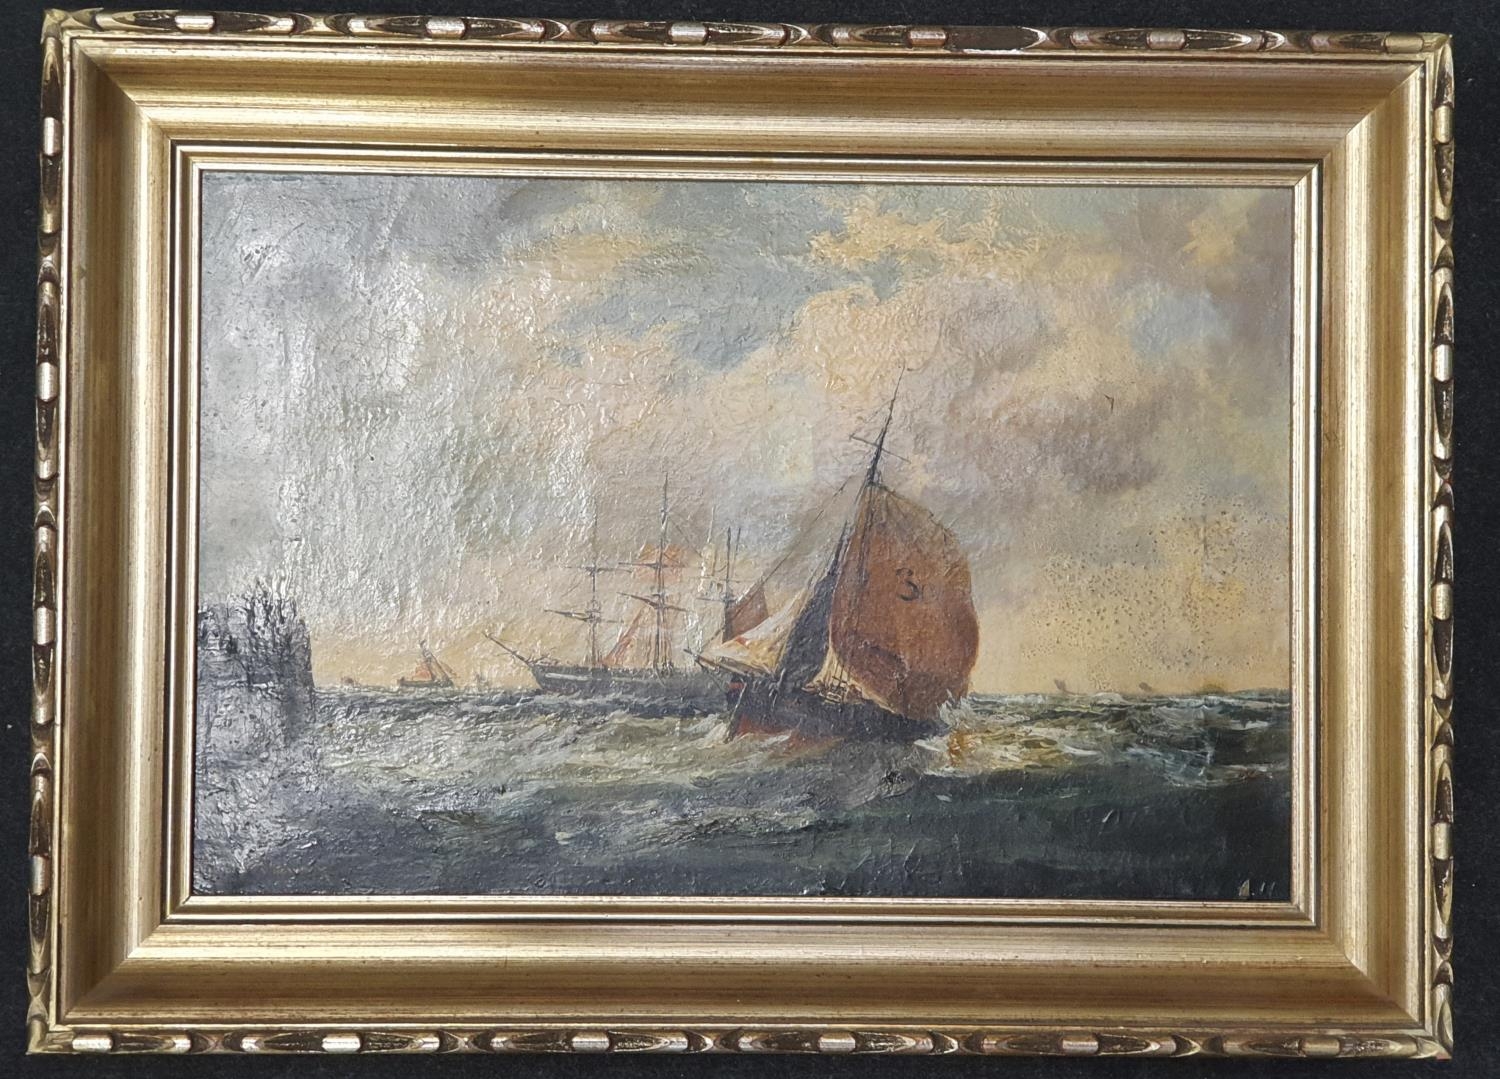 Framed and signed oil on canvas painting of ships on rough seas 41.5x57cm